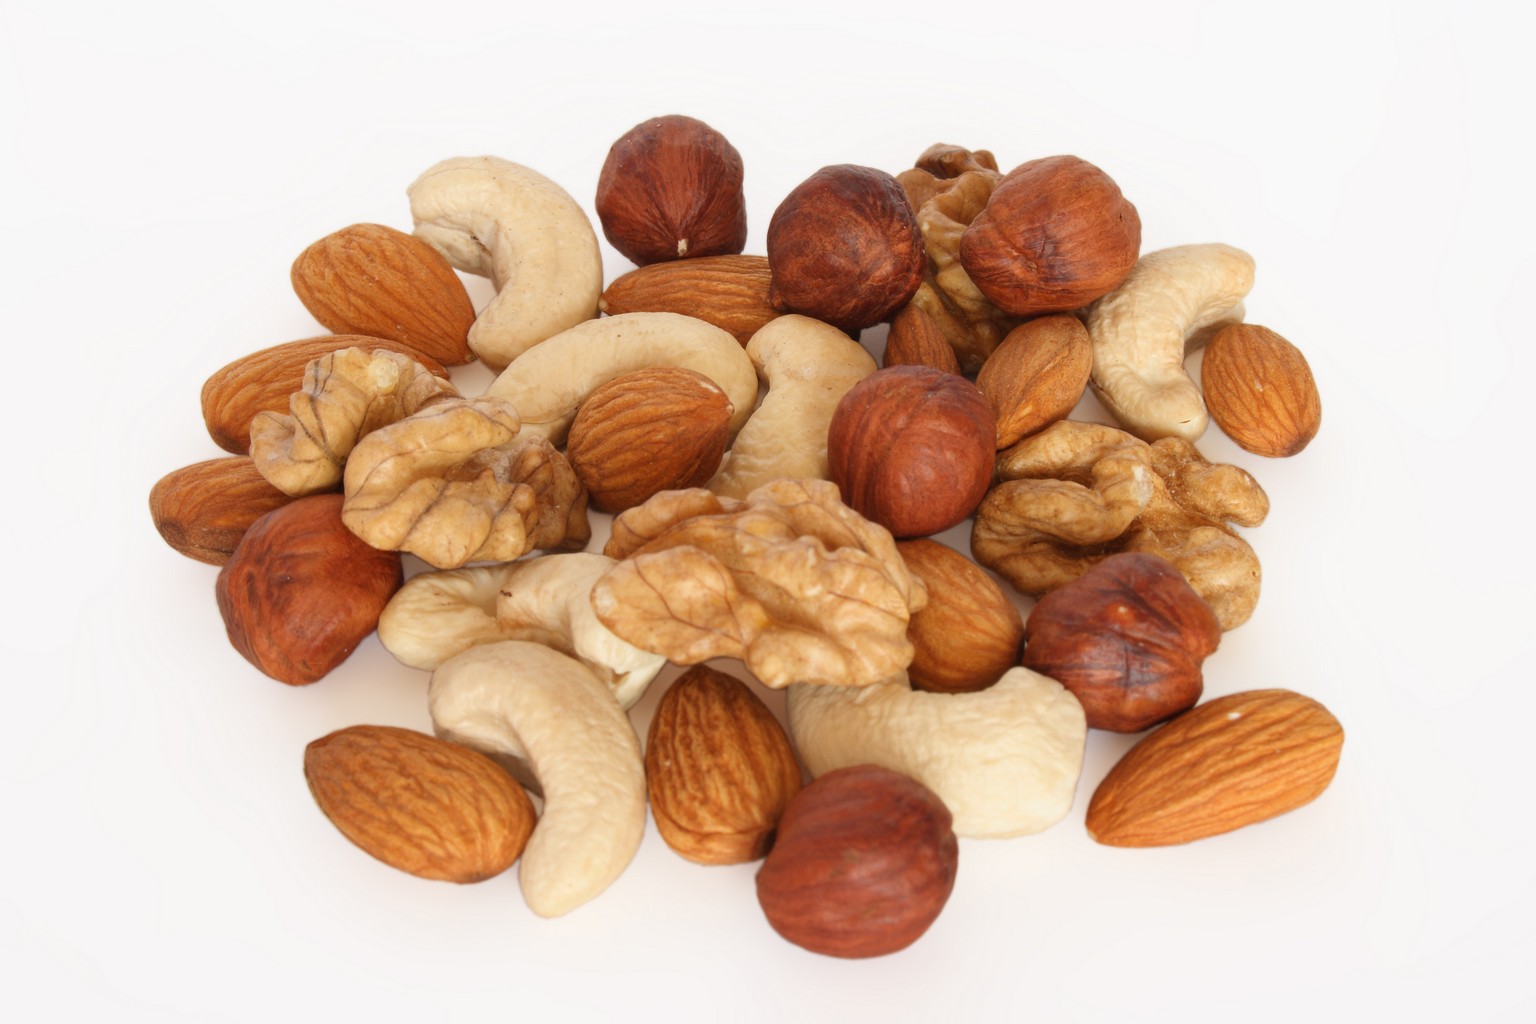 Pile of assorted nuts isolated over white background